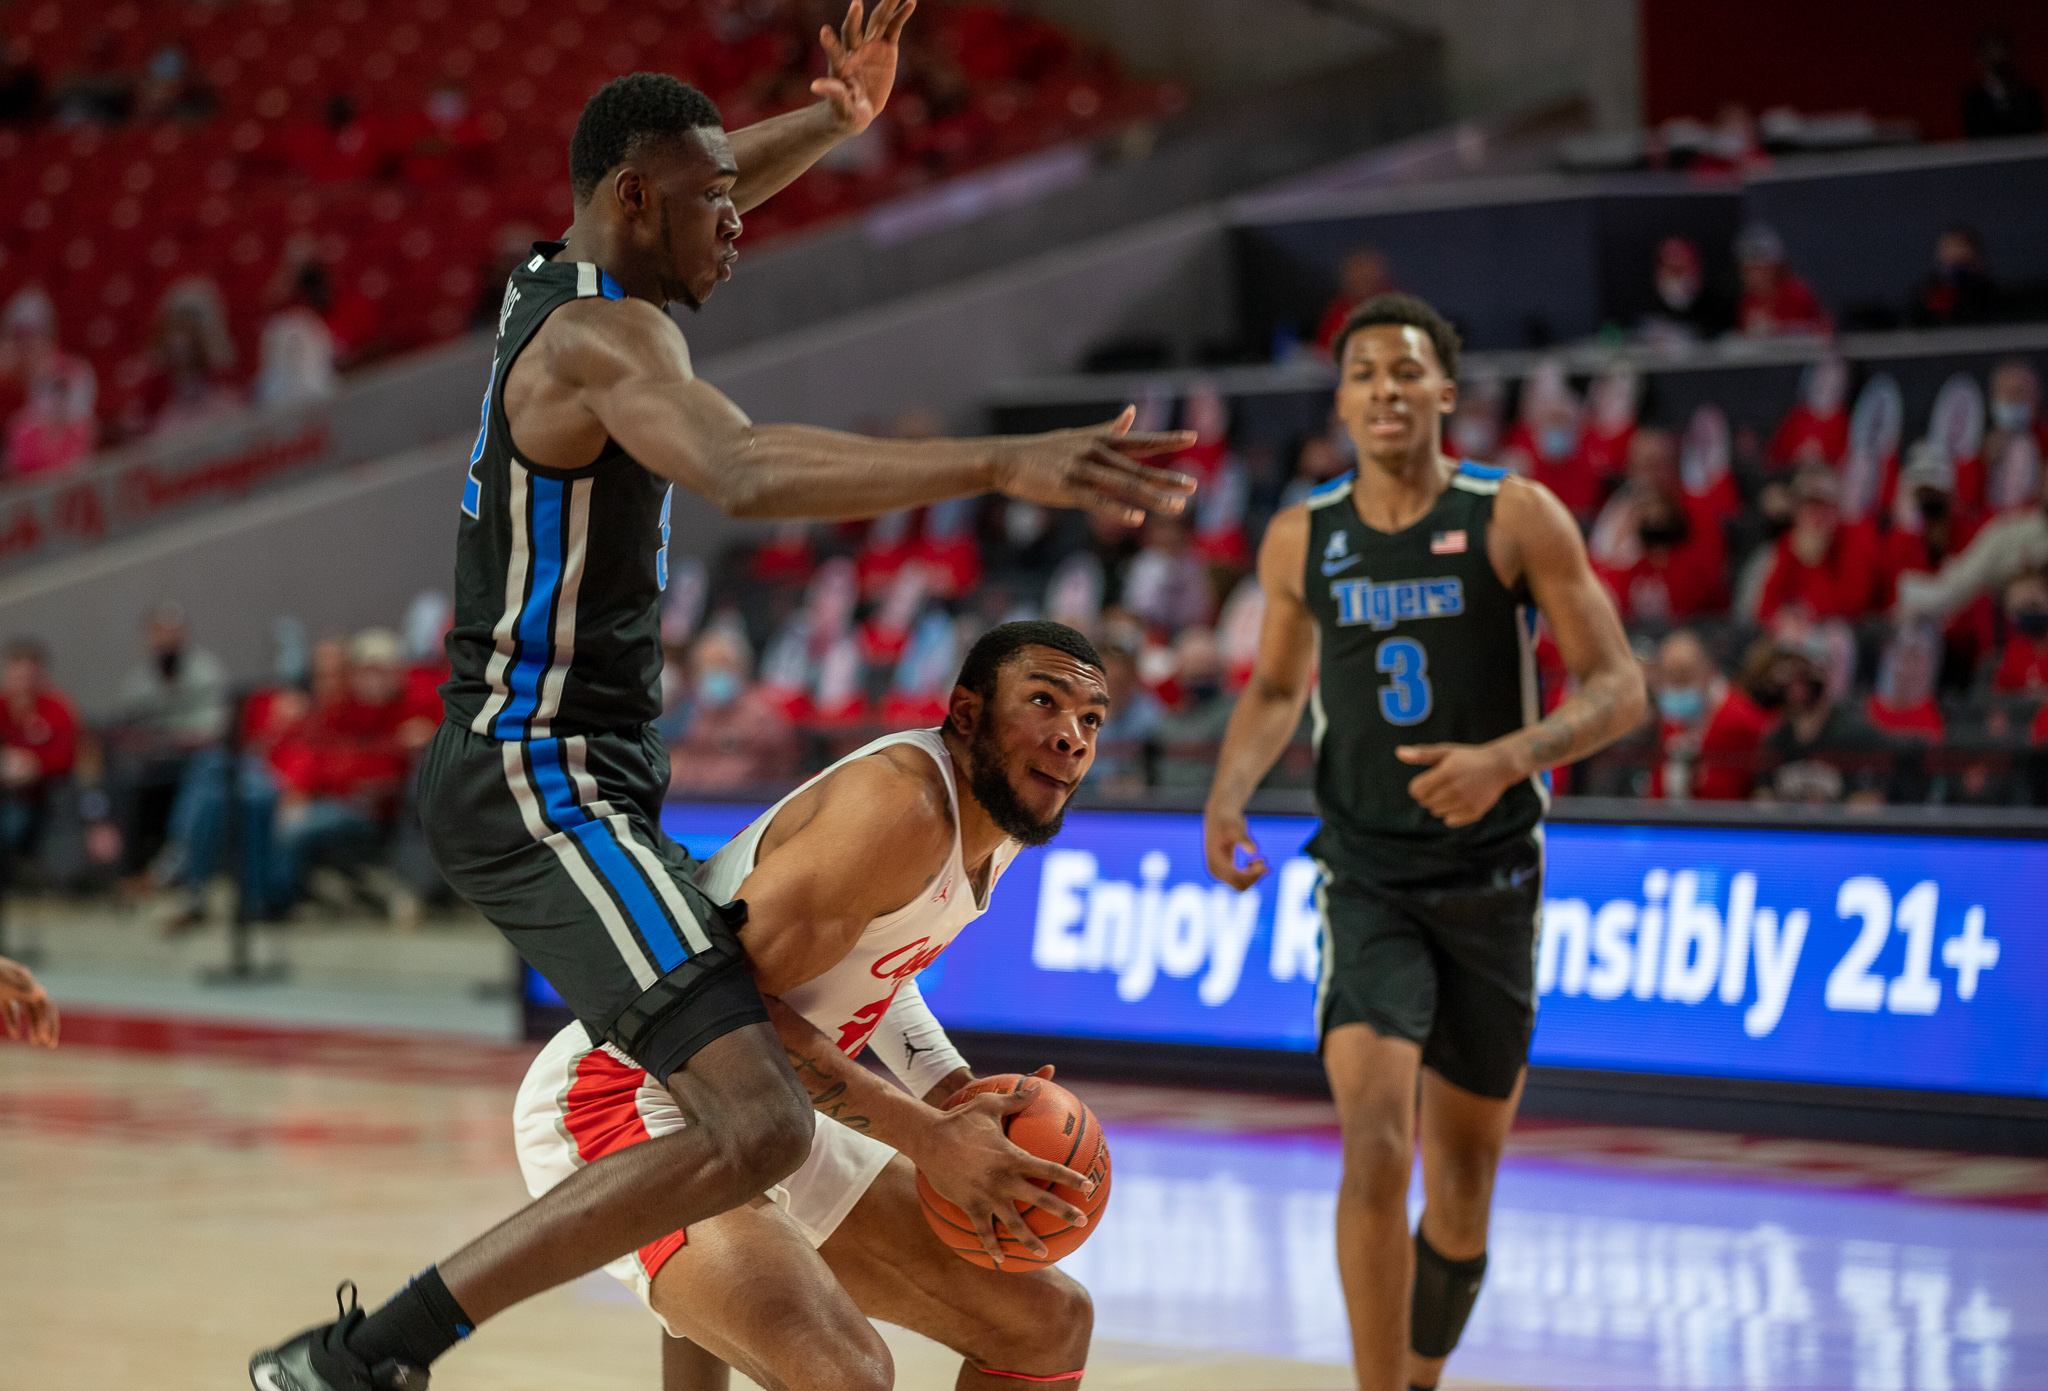 UH forward Reggie Chaney gathers the ball as he prepares to power through the contact against Memphis on March 7 at Fertitta Center. | Andy Yanez/The Cougar